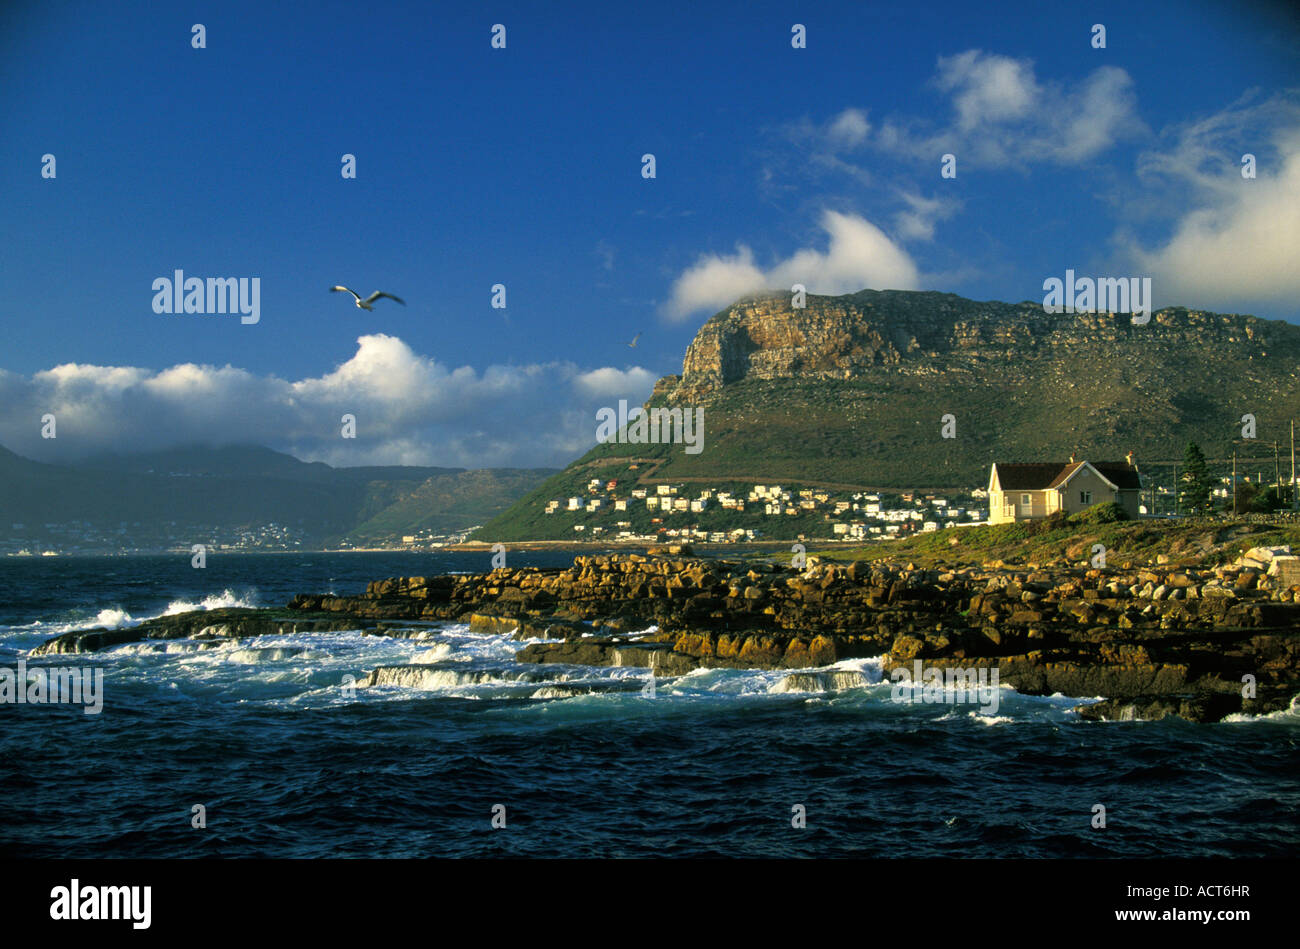 A view over a rocky beach with holiday homes on the slopes of a hill in the background Western Cape South Africa Stock Photo